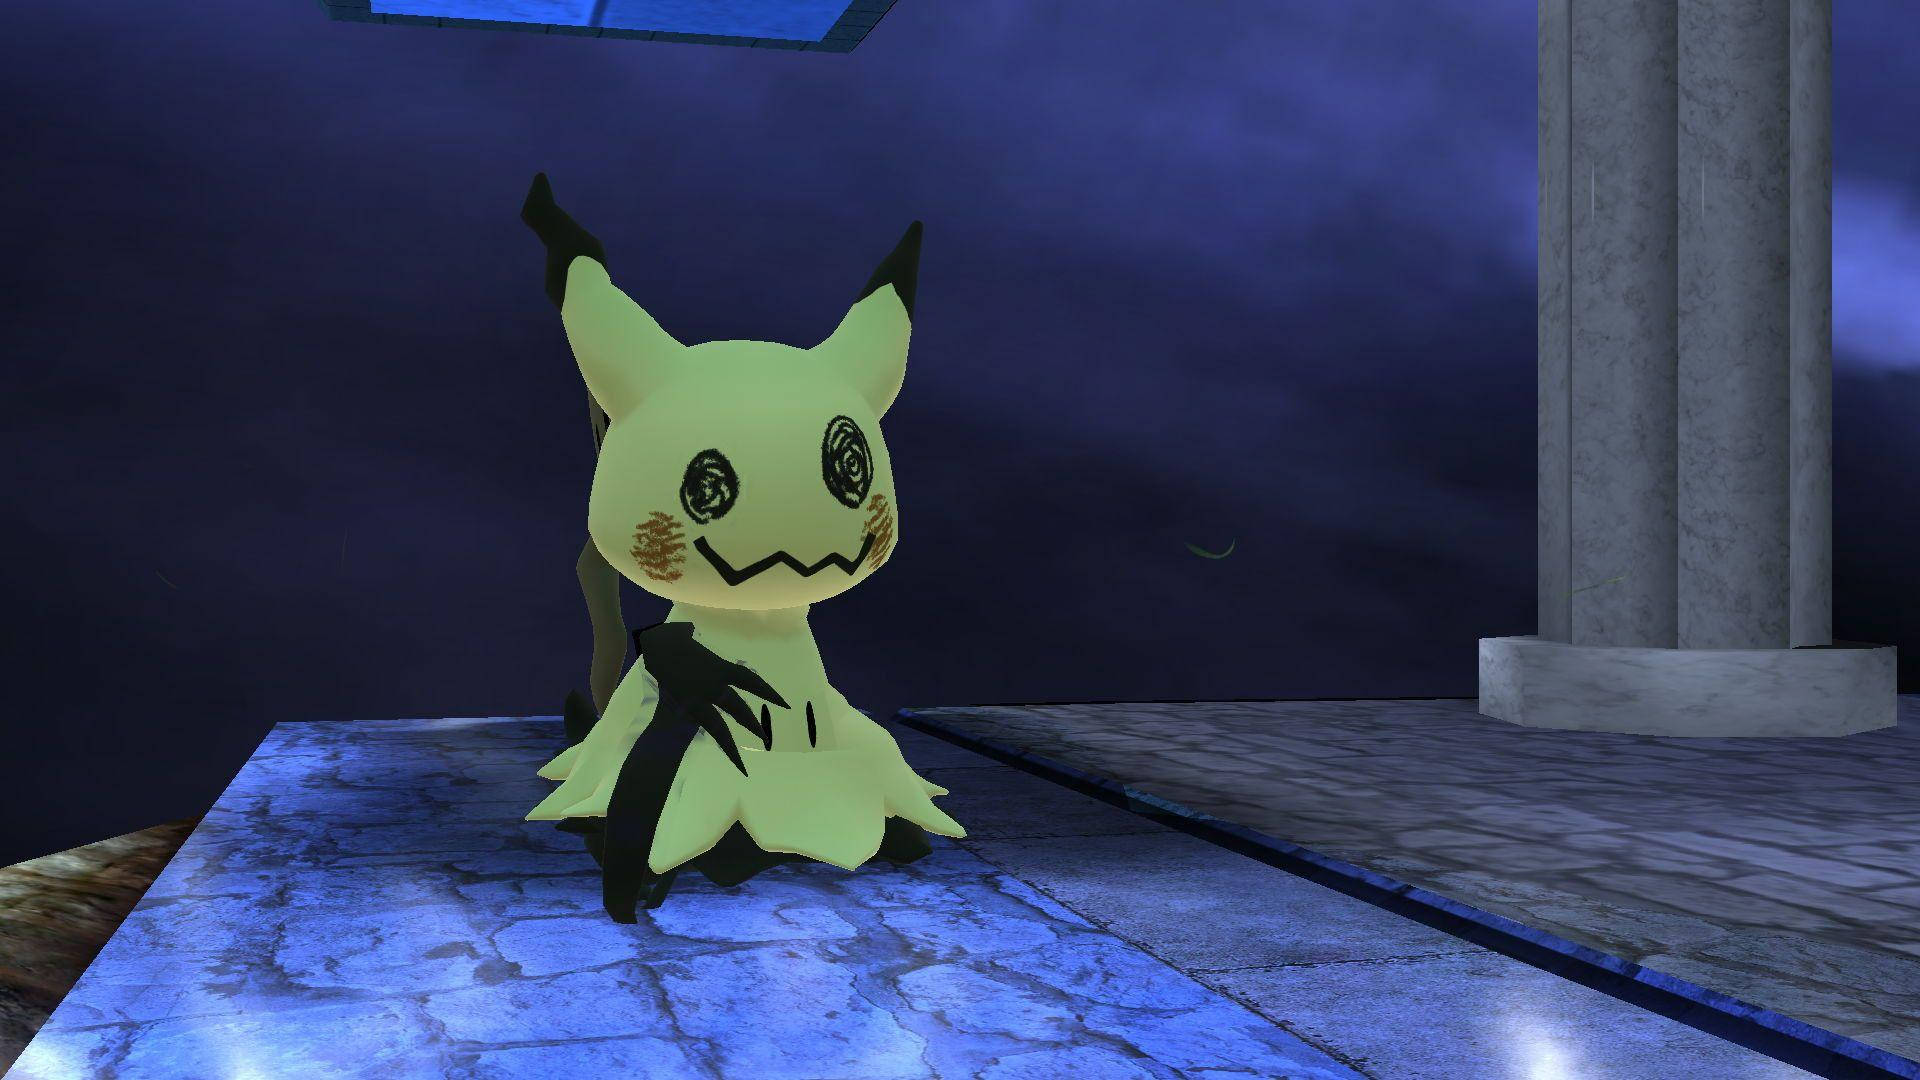 A Yellow And Black Pikachu Standing On A Stone Floor